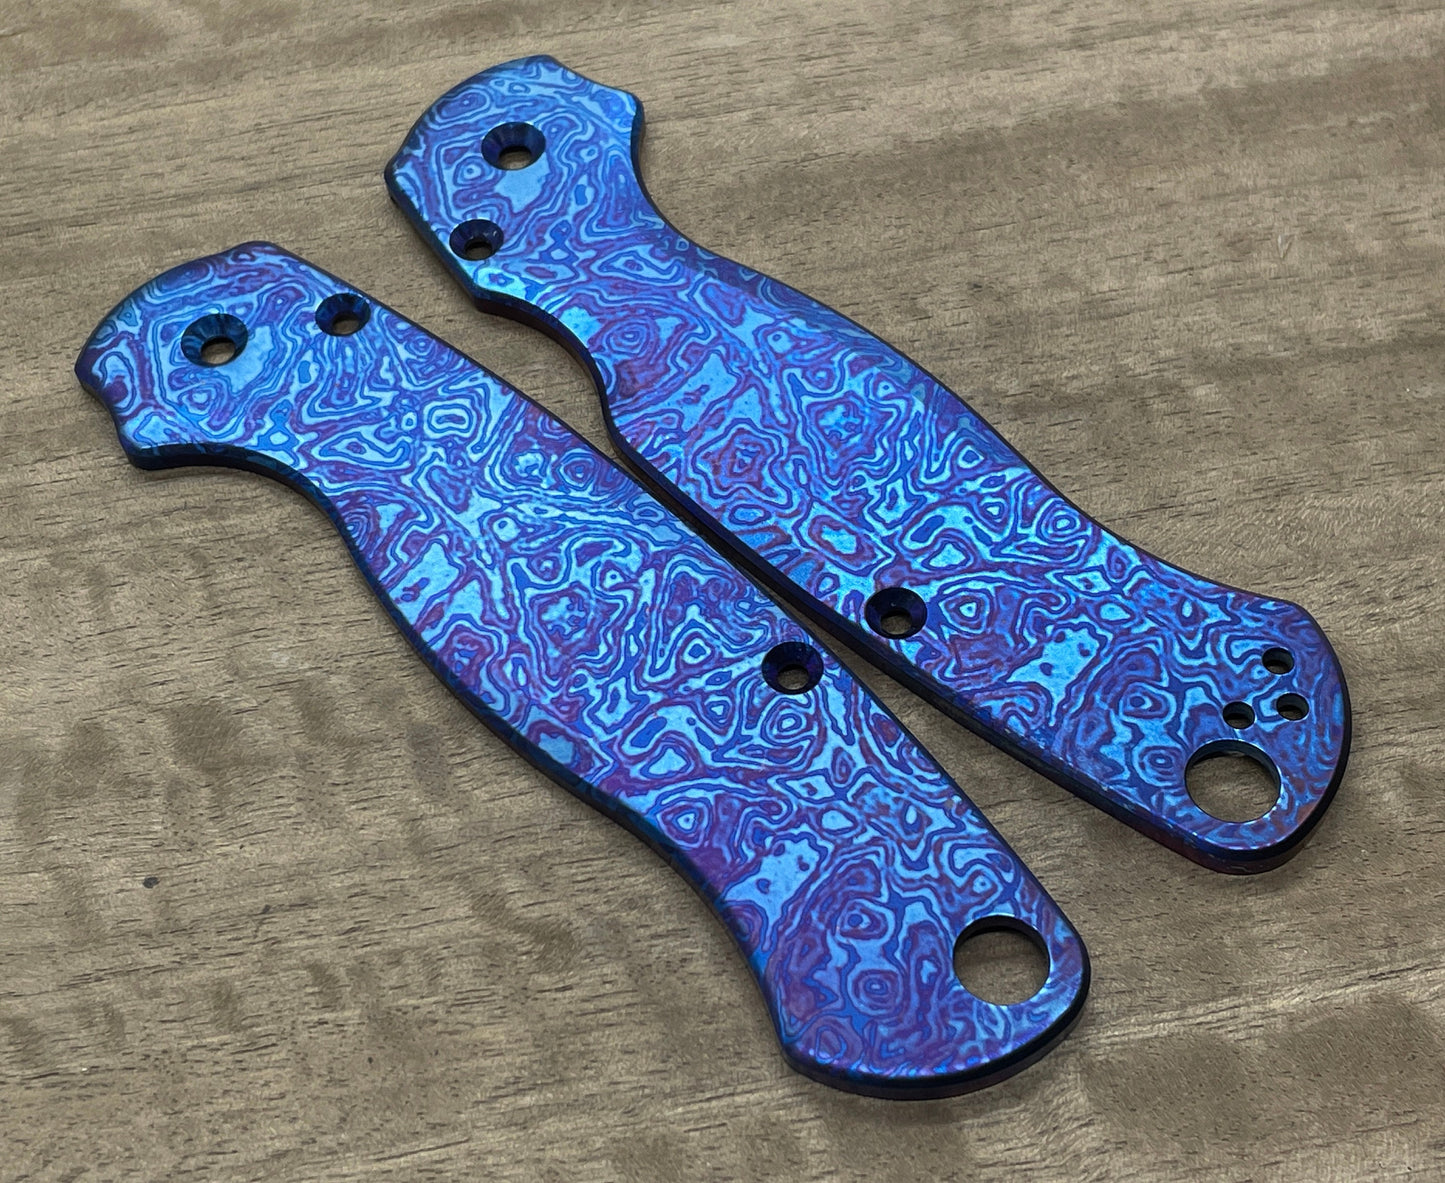 ALIEN Flamed Titanium scales for Spyderco Paramilitary 2 PM2